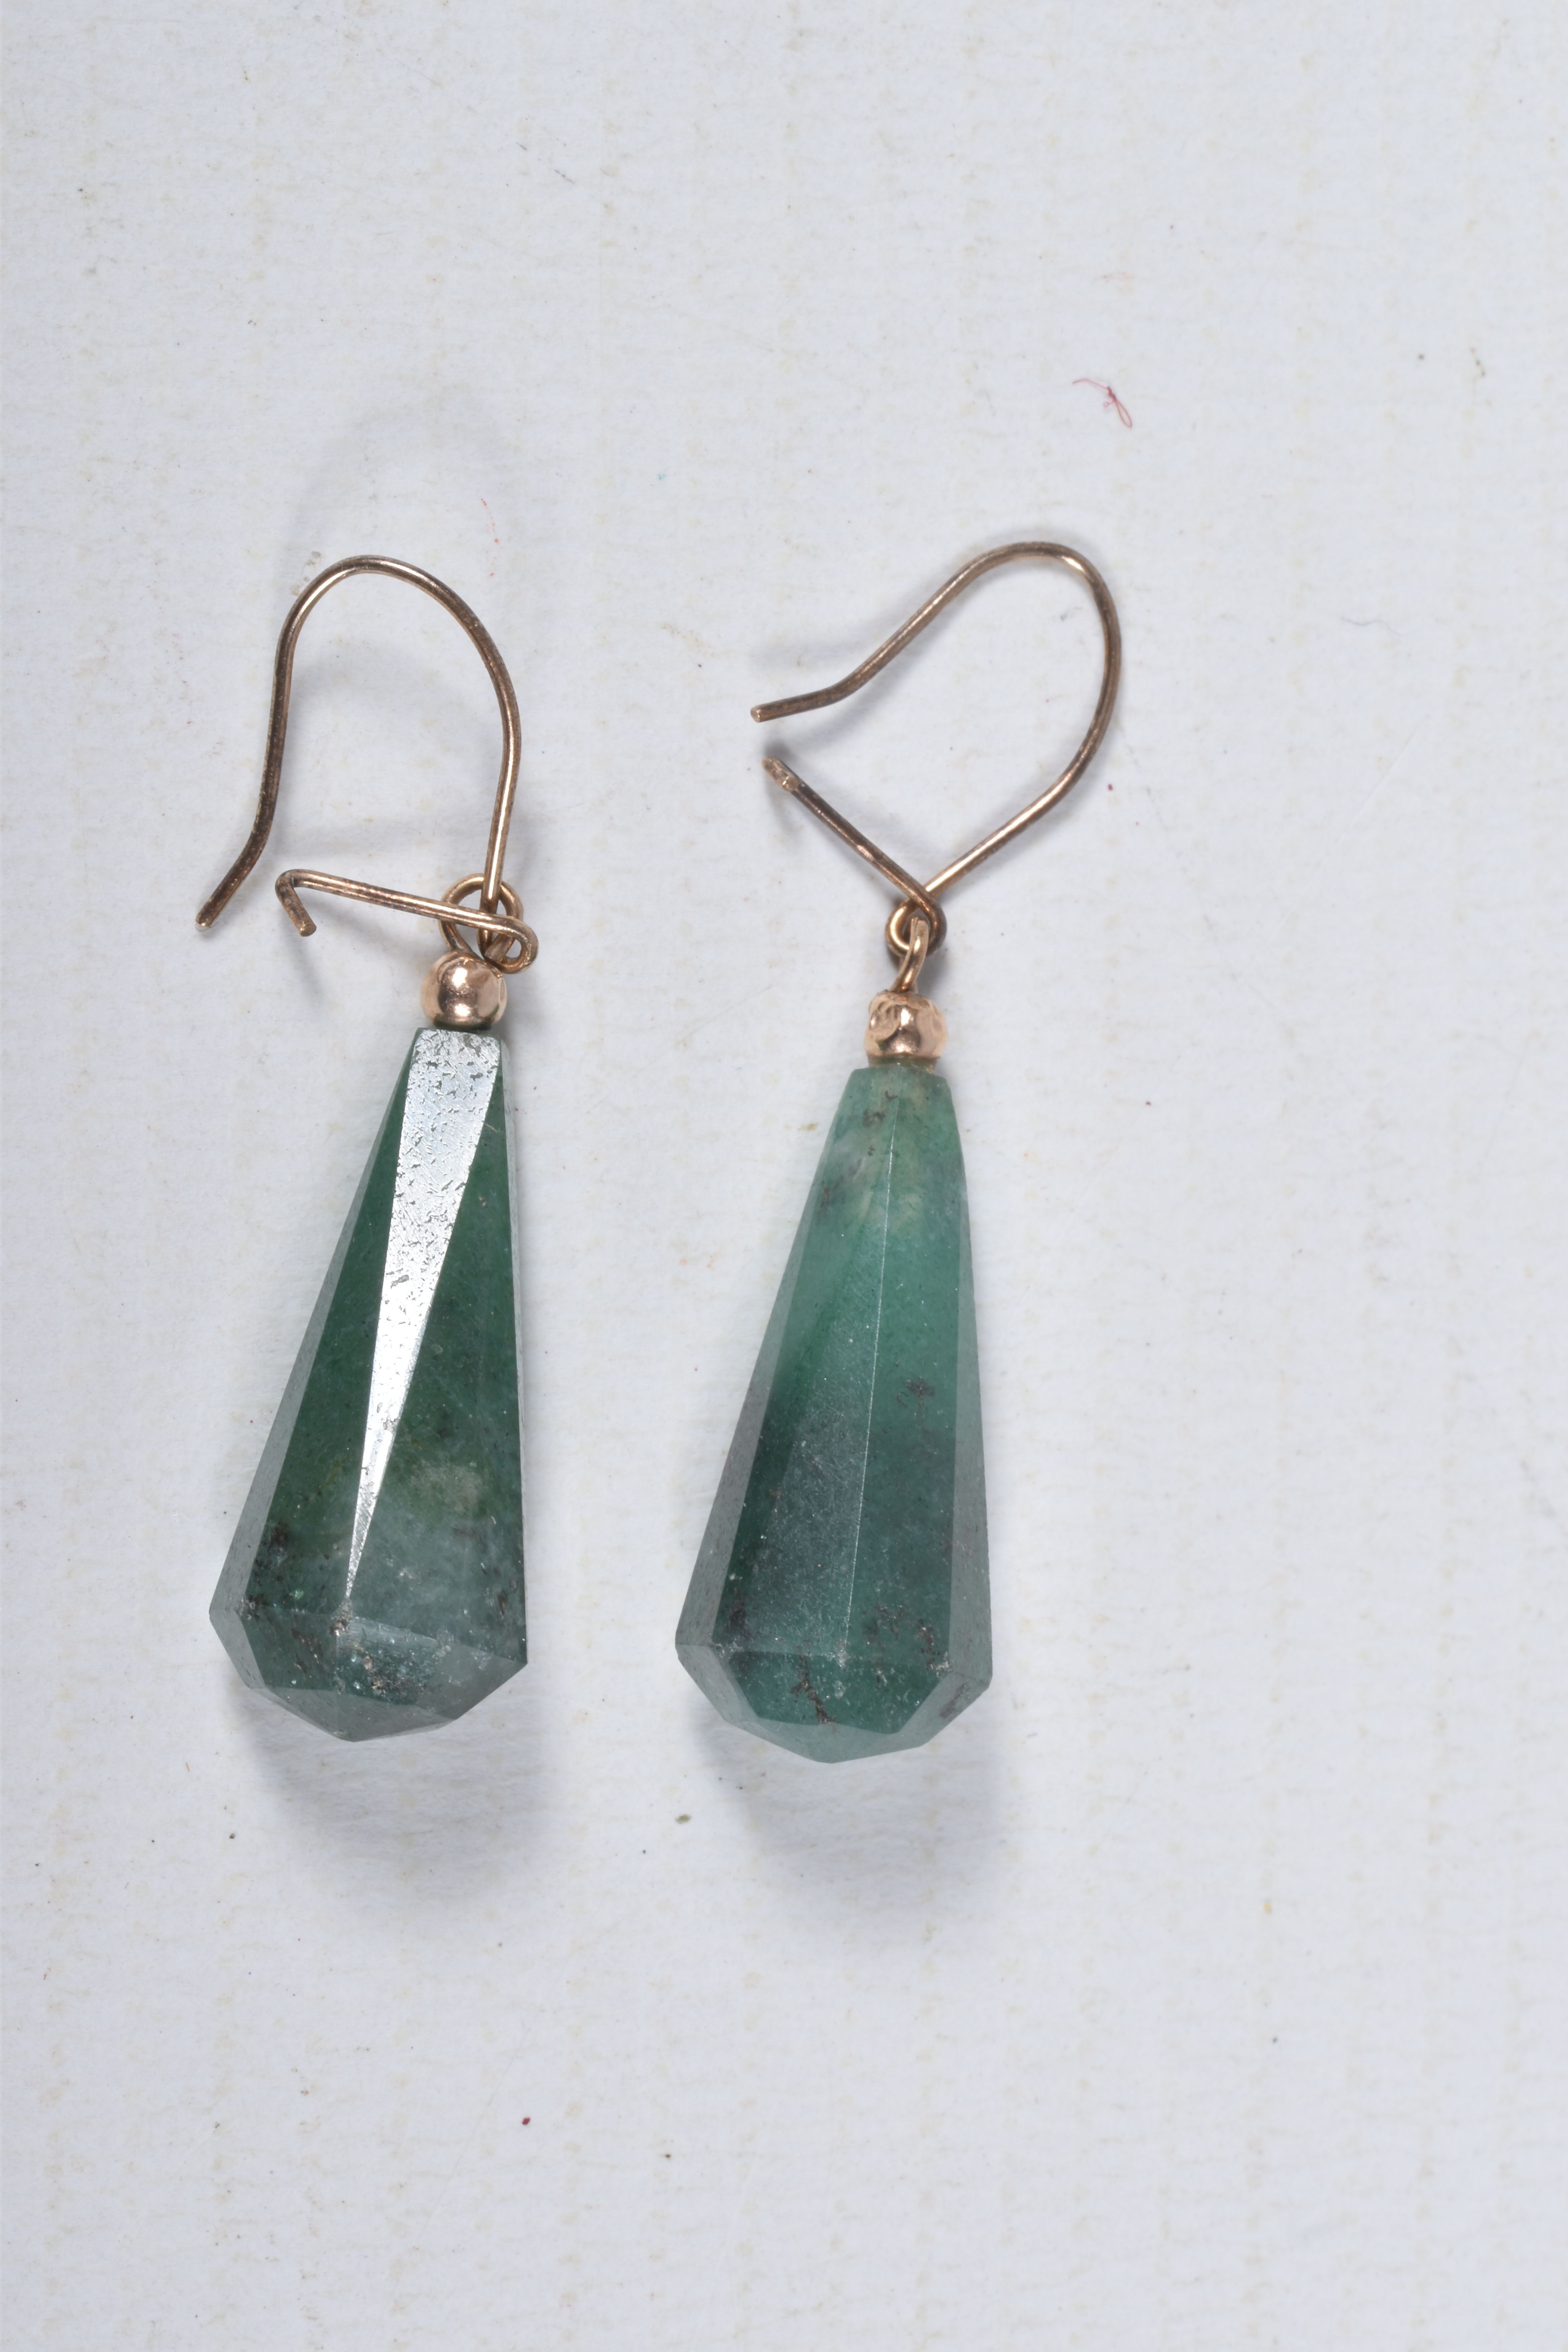 A PAIR OF GREEN QUARTZ DROP EARRINGS, faceted tapering drops, fitted with unmarked yellow metal fish - Image 3 of 3